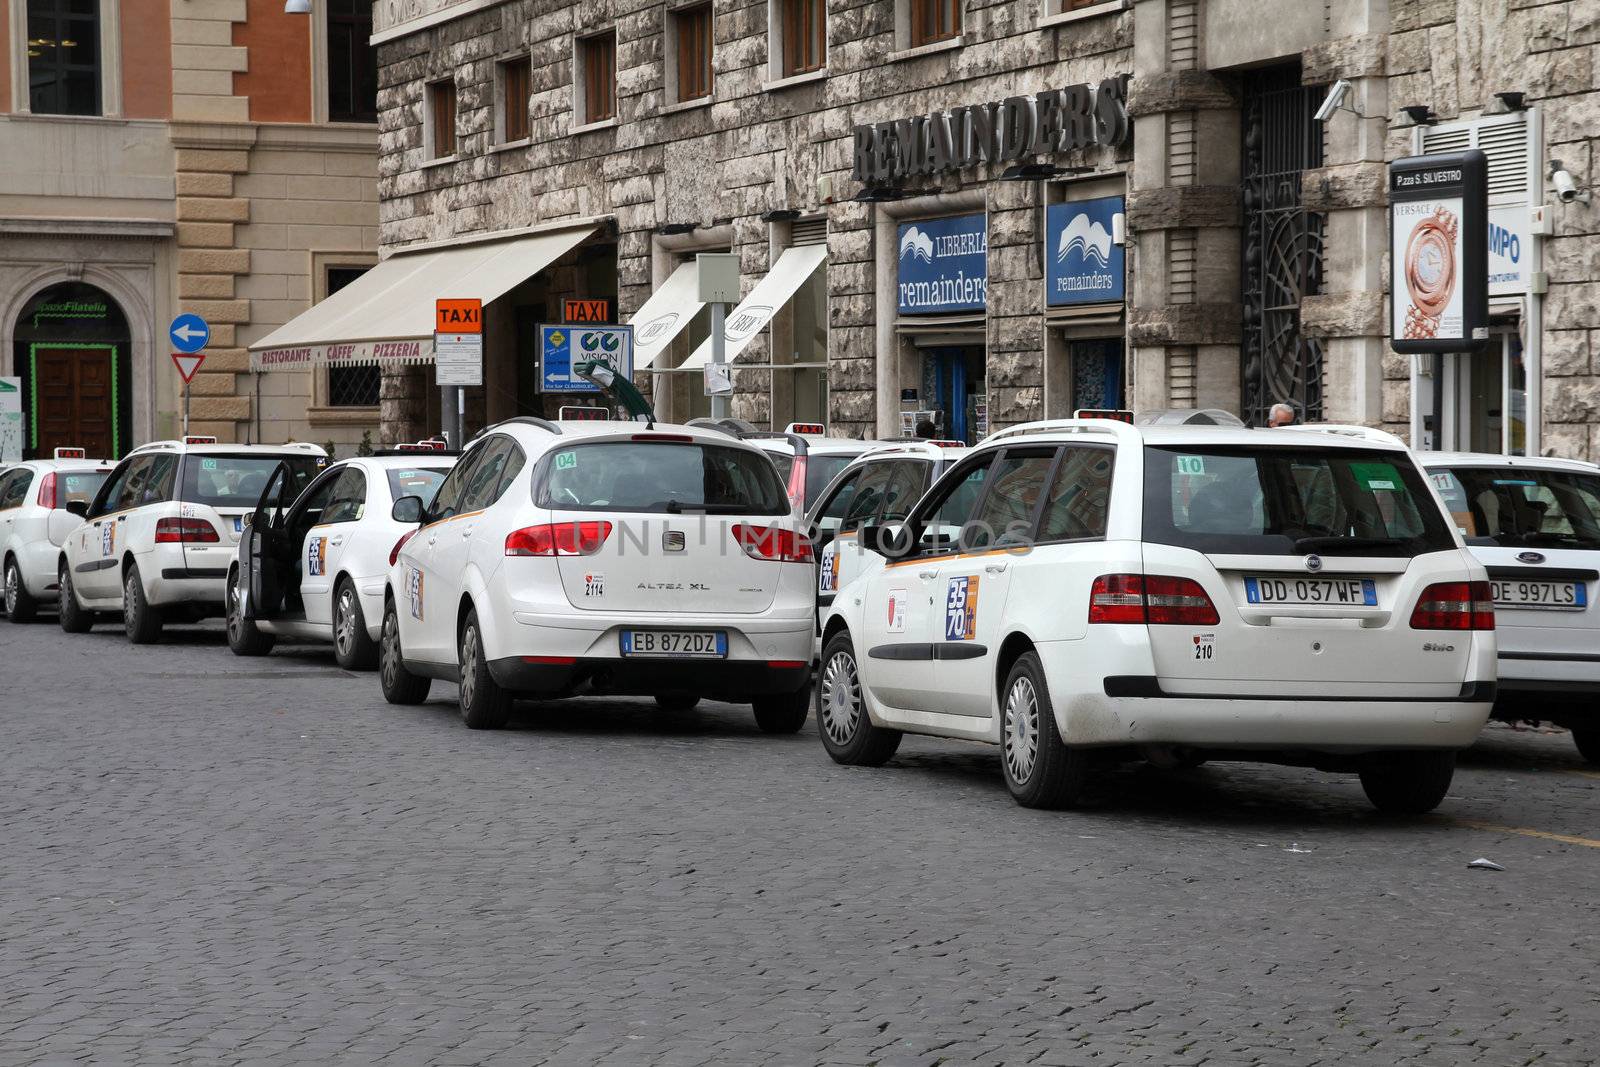 ROME - MAY 11: Taxi stand on May 11, 2010 in Rome, Italy. Rome is infamous for its constant traffic congestion and in addition it has one of the lowest numbers of taxis in Europe (21 per 10000 people).